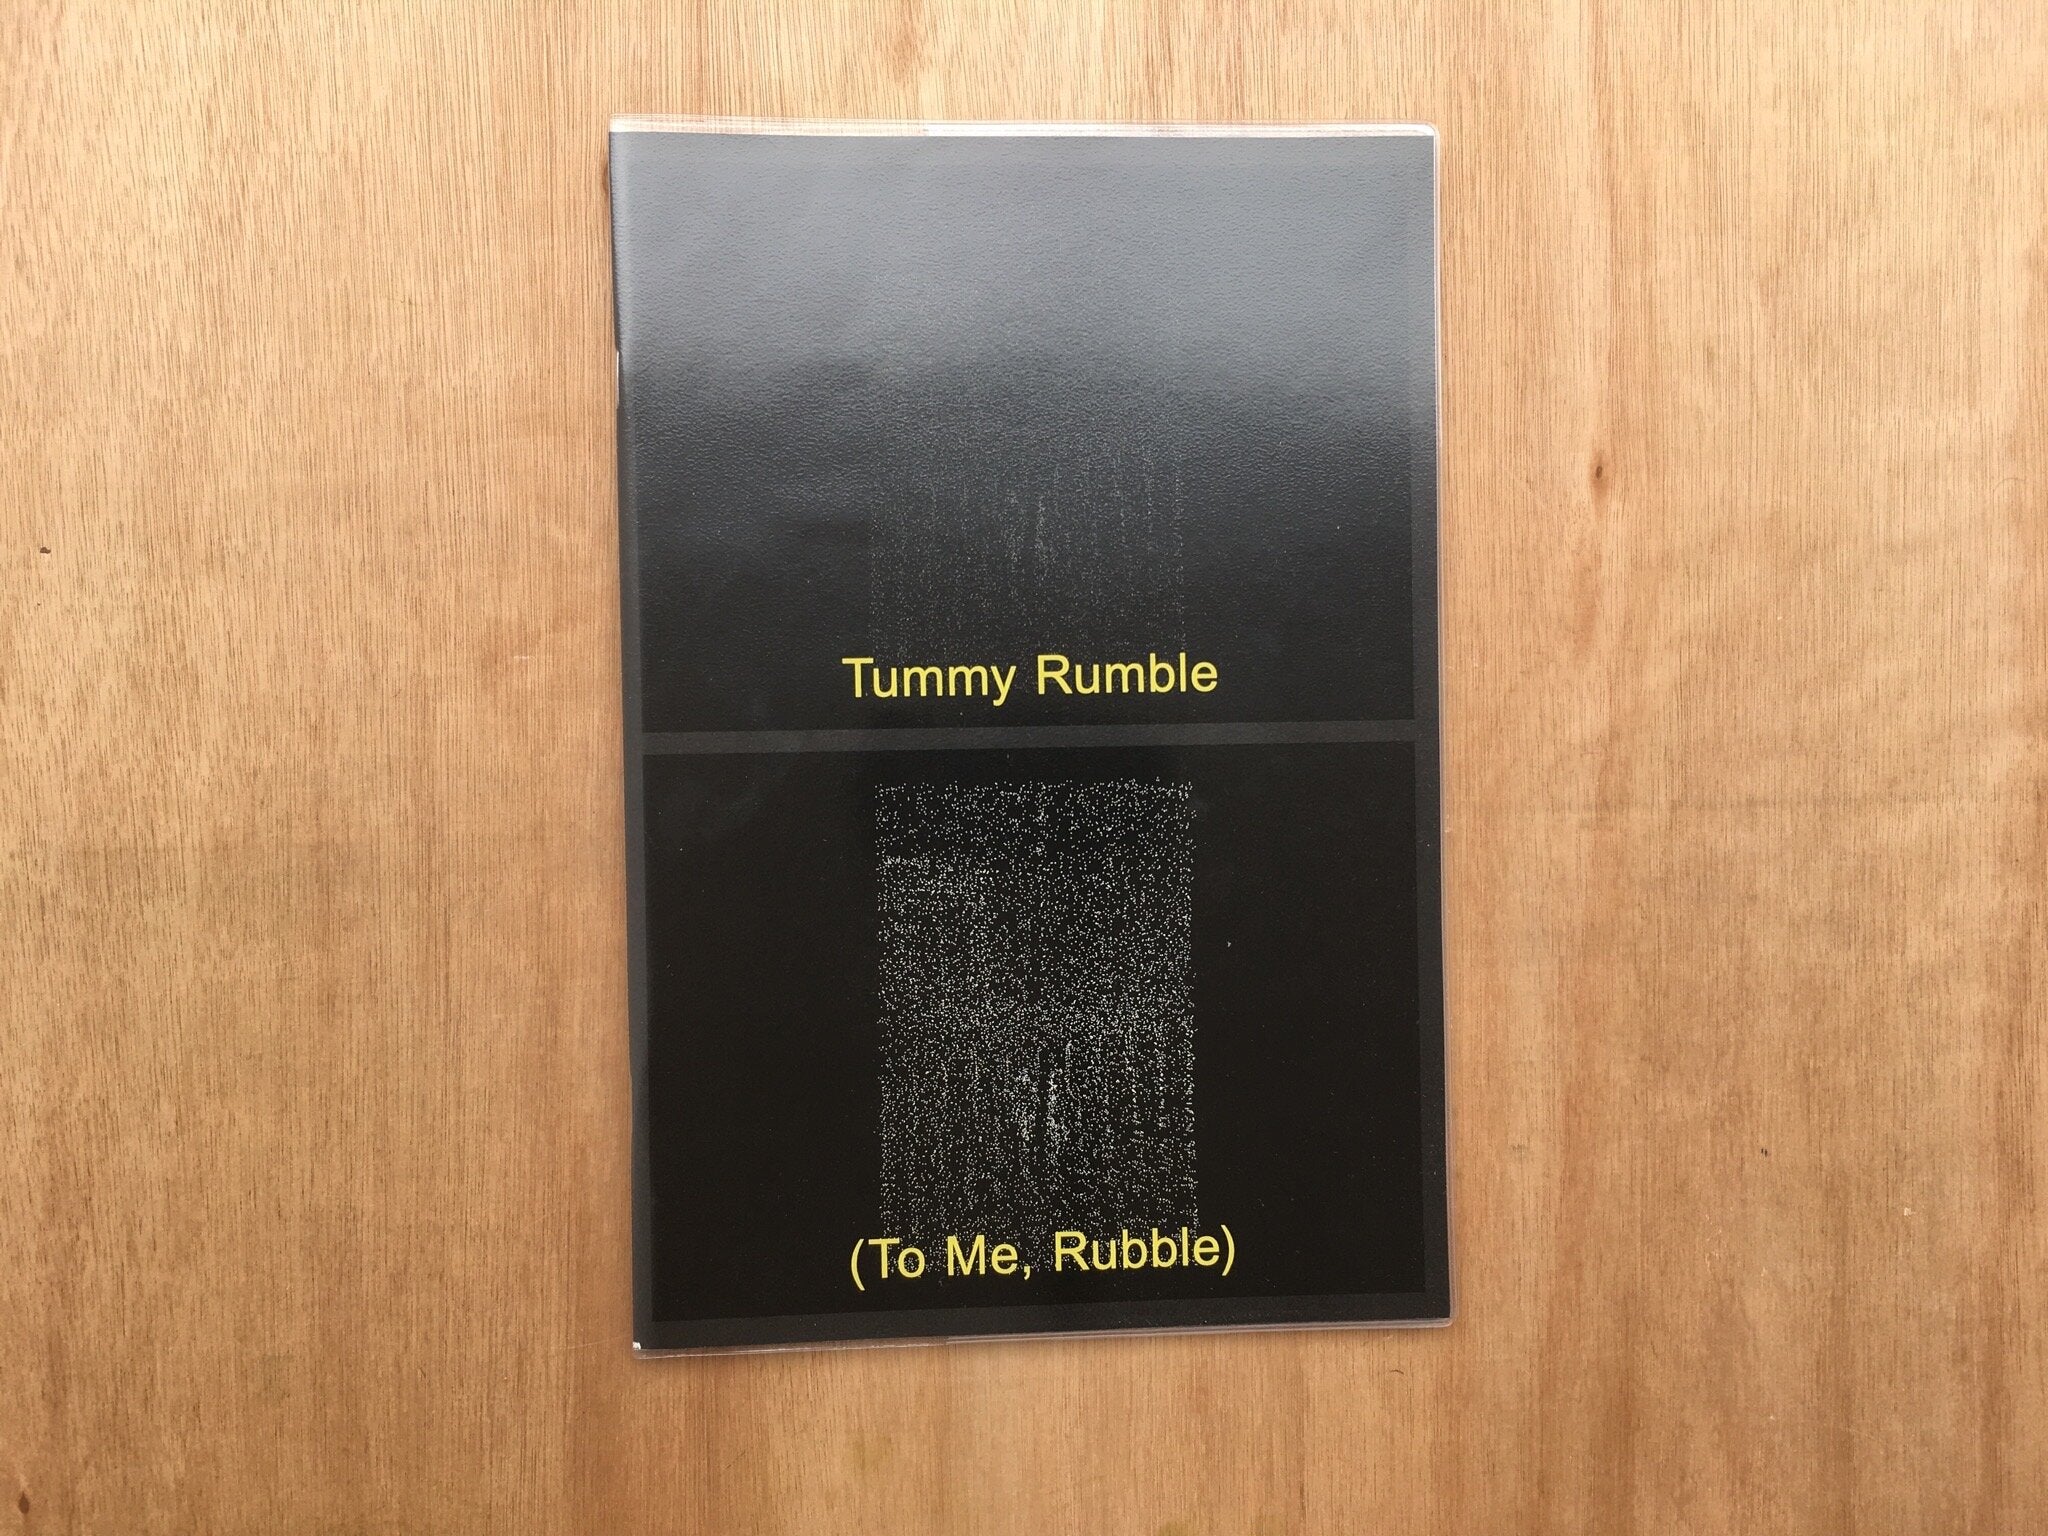 TUMMY RUMBLE (TO ME, RUBBLE) by Rudy Guedj & Will Pollard